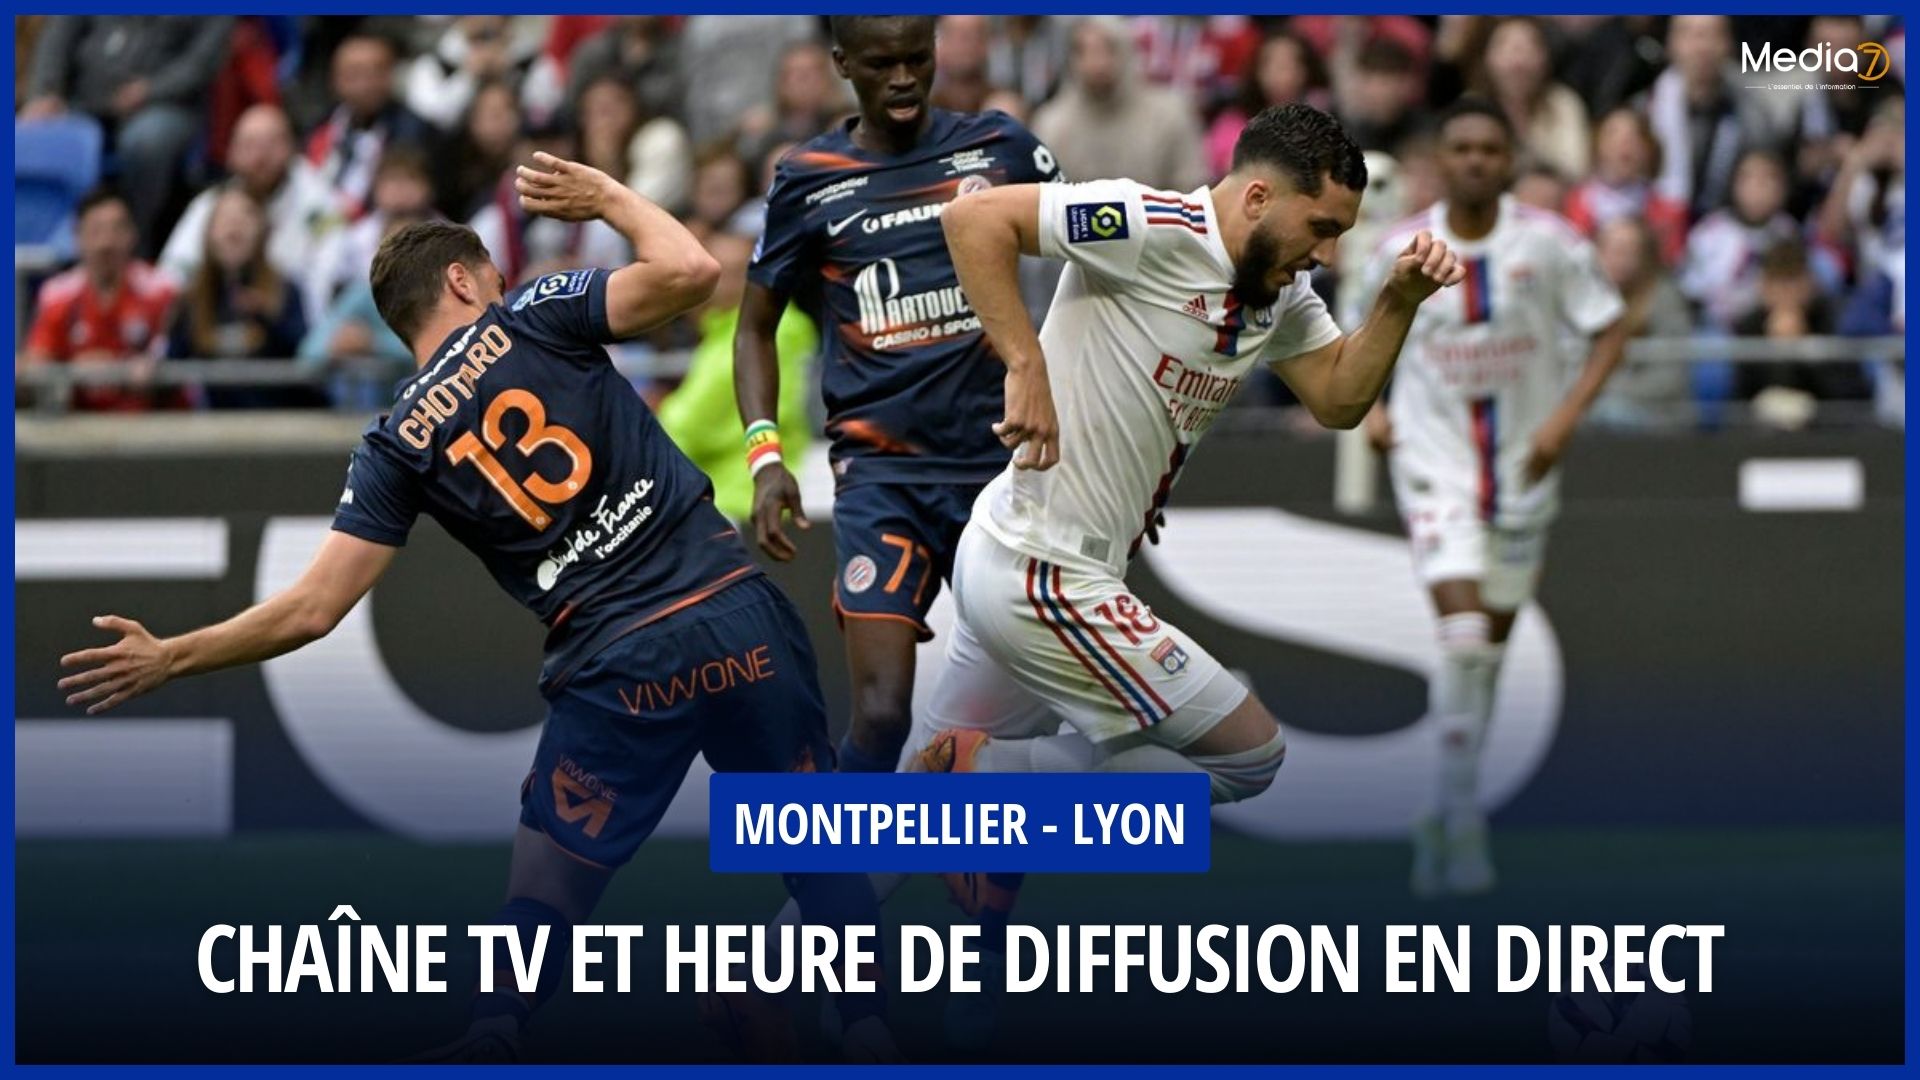 Montpellier - Lyon Match Live: TV Channel and Broadcast Time - Media7